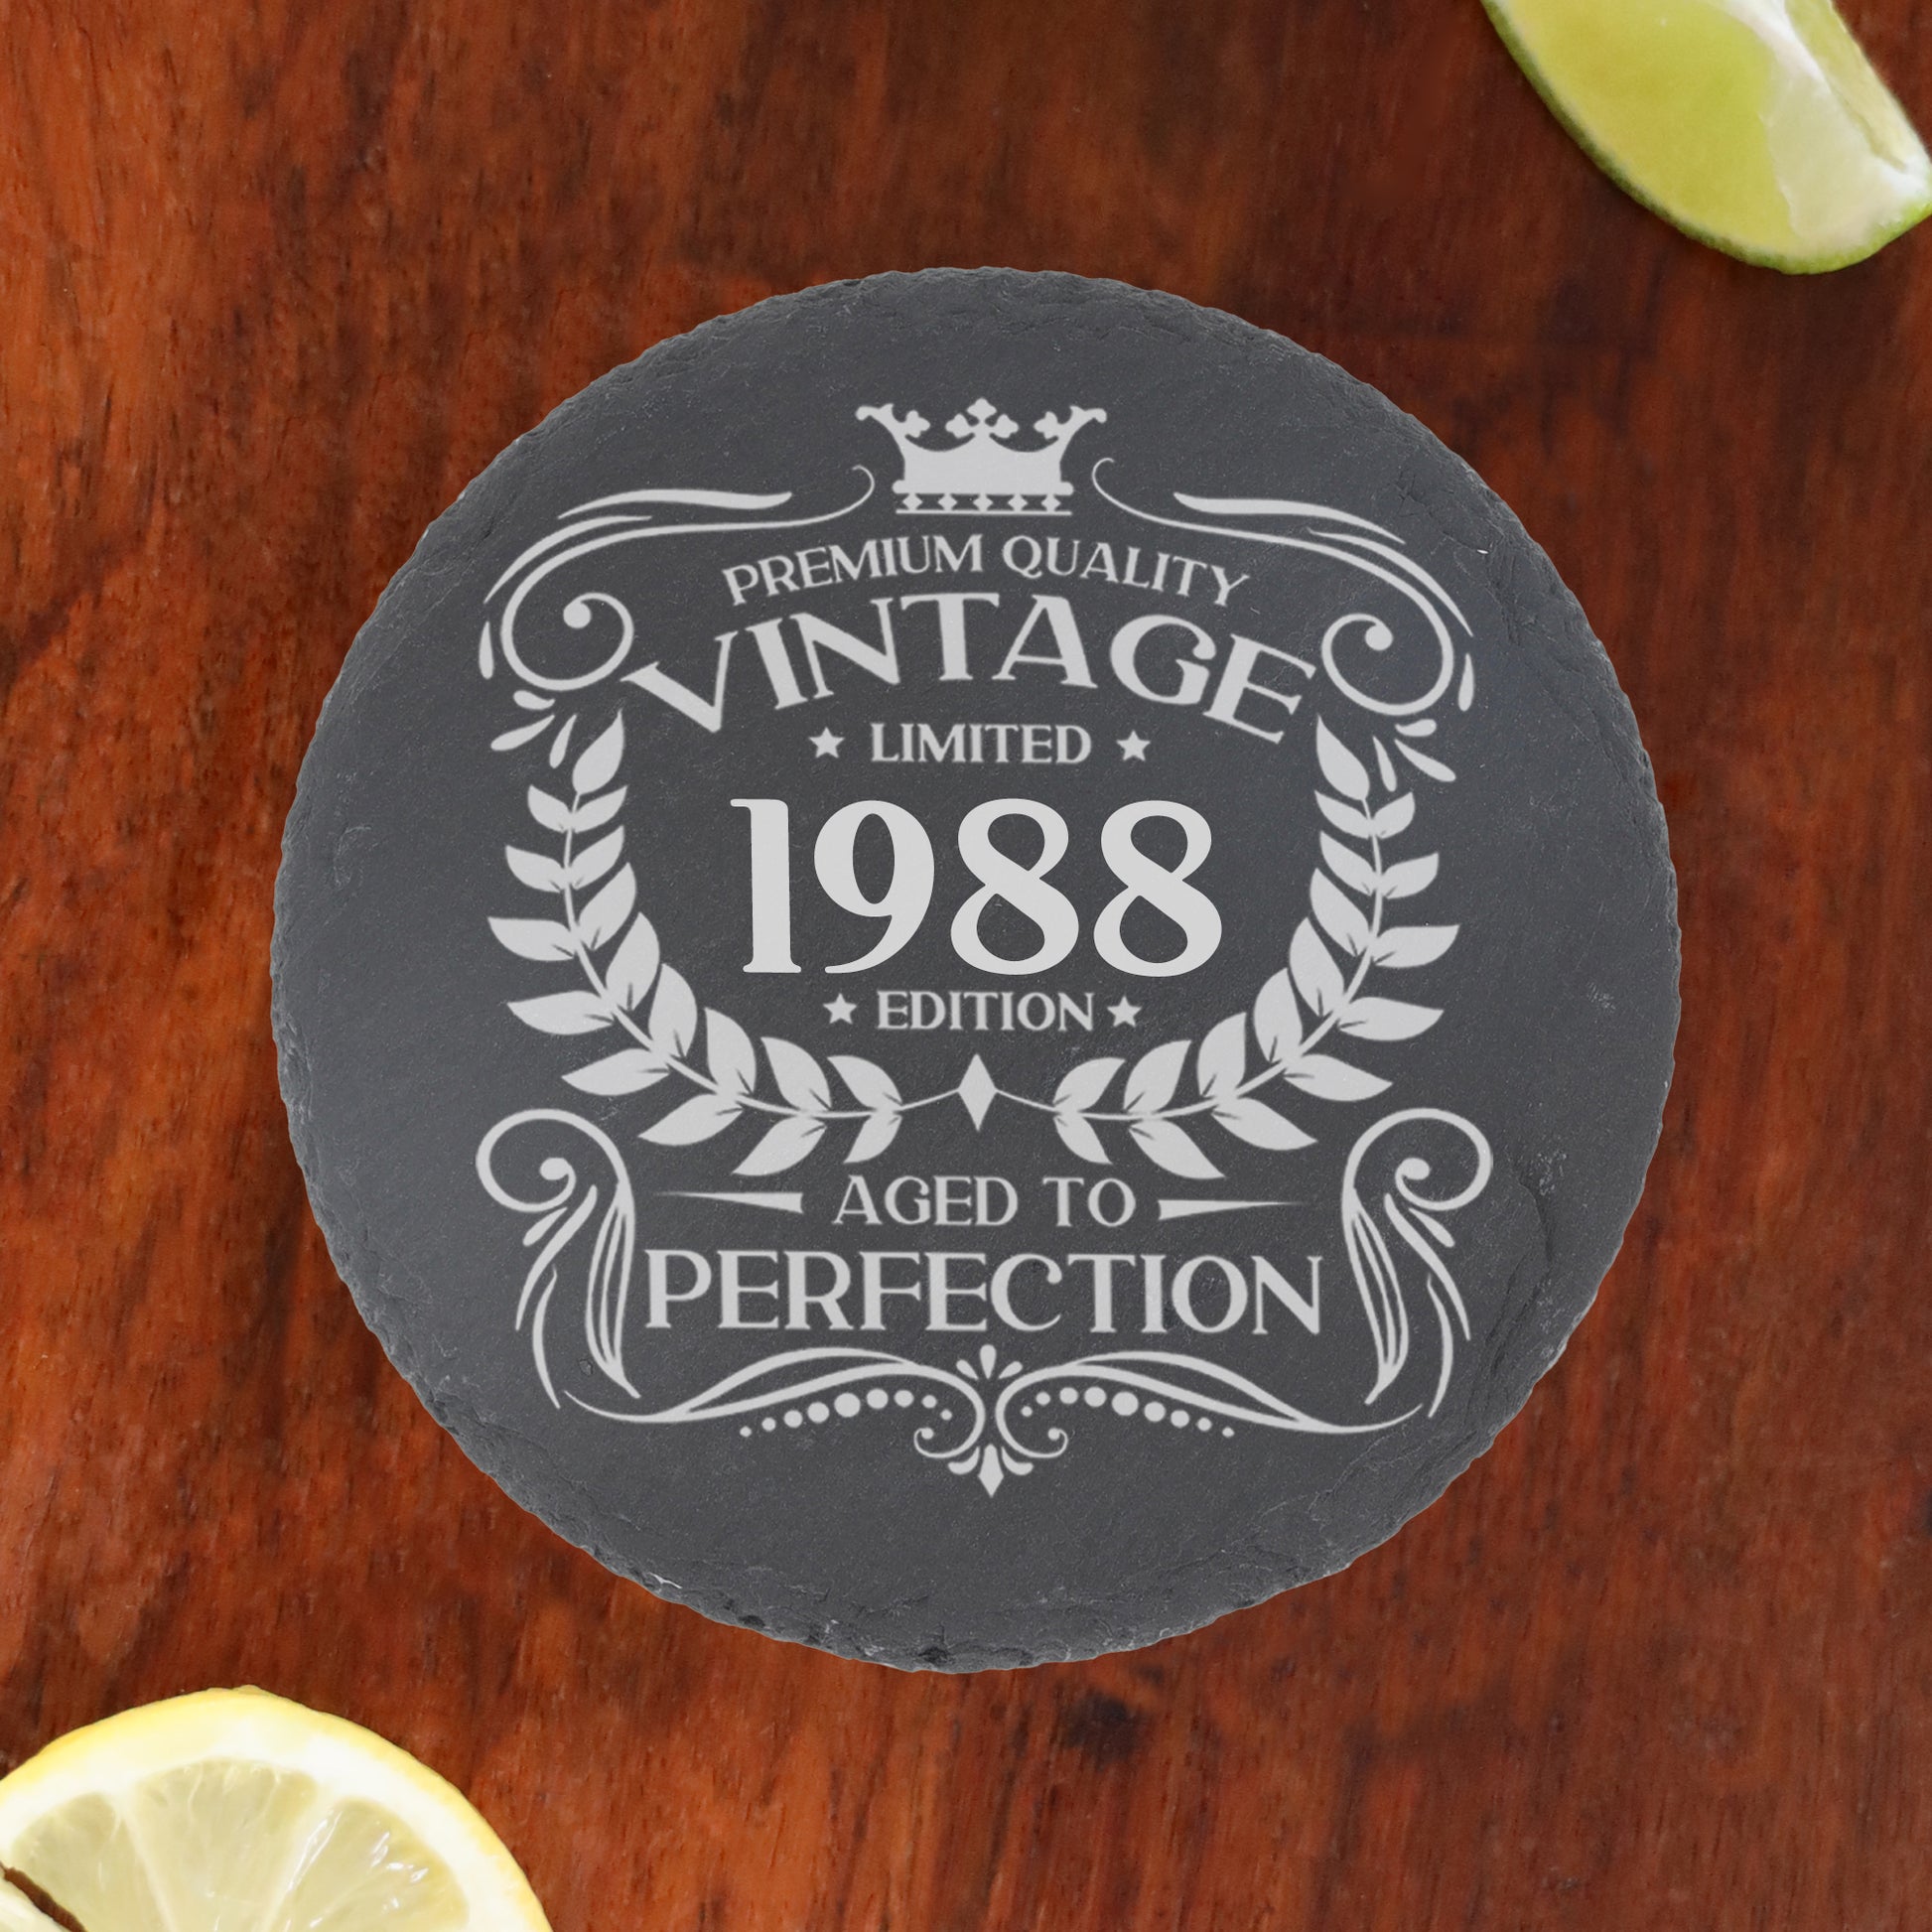 Personalised Vintage 1988 Mug and/or Coaster  - Always Looking Good - Round Coaster On Its Own  